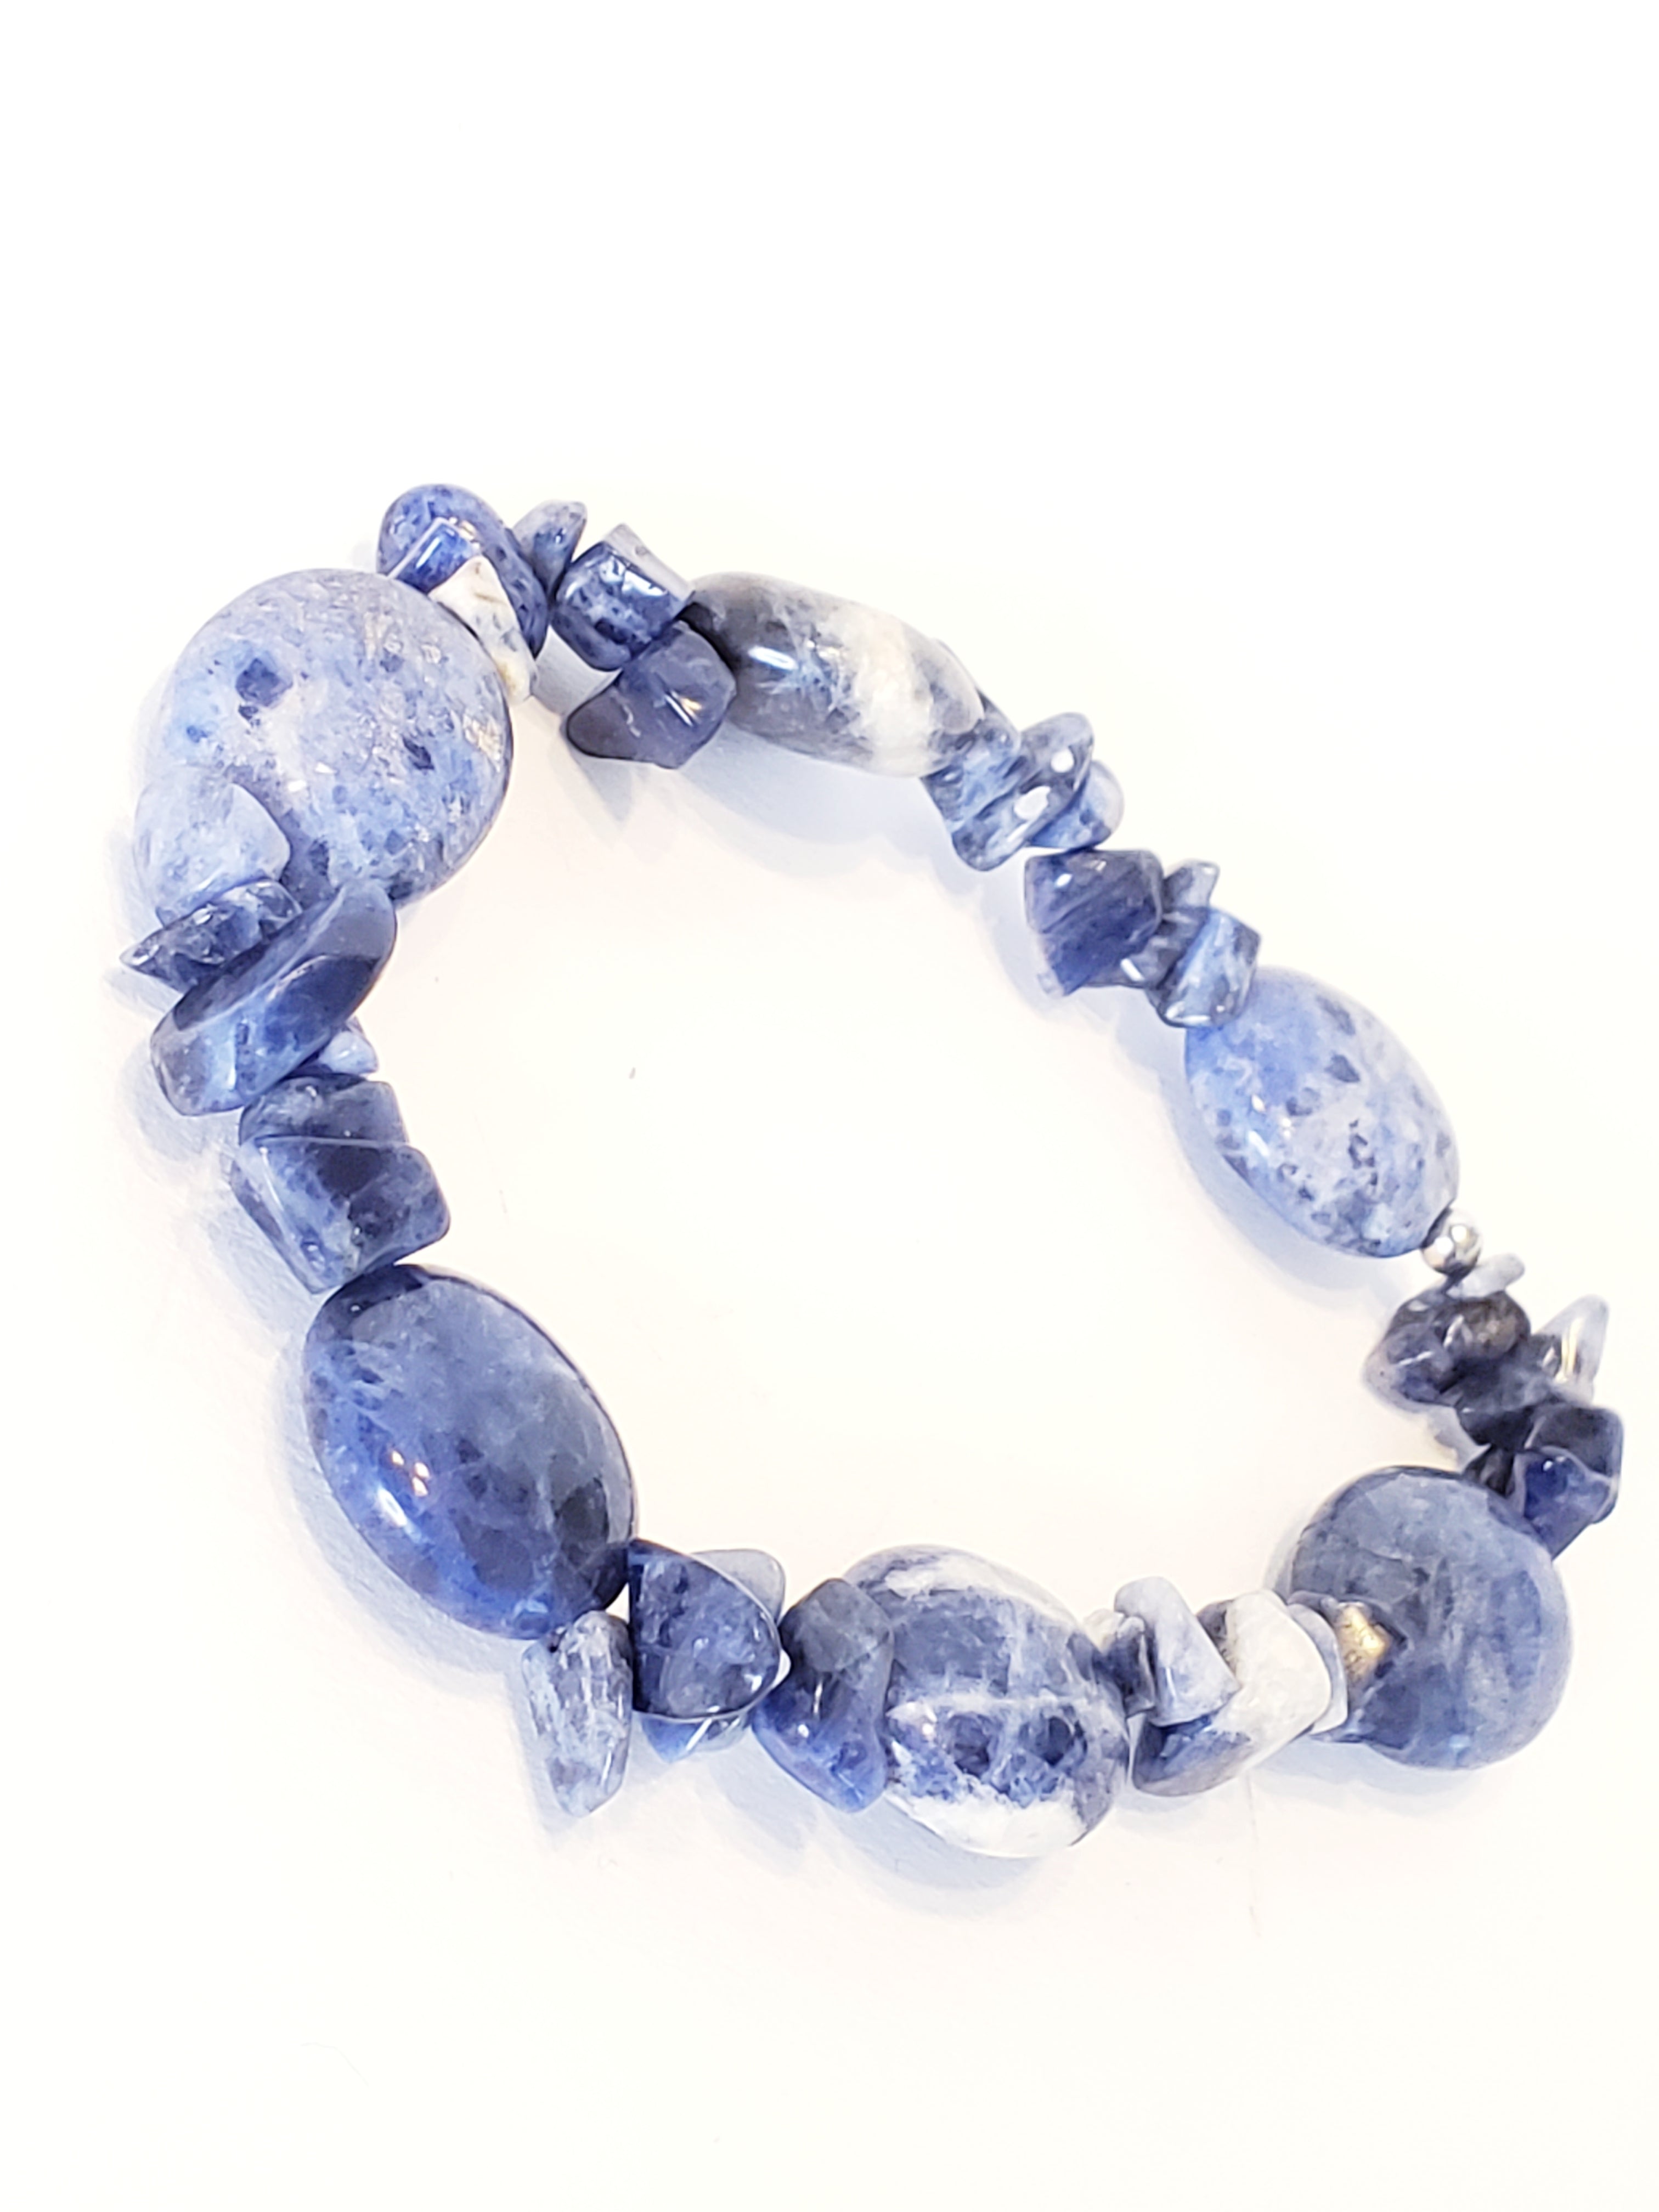 Beautiful stretch bracelet handcrafted with sodalite, a mineral stone that enhances self-esteem; calming and enhances emotional balance. Facilitates logical thinking; improves logical thinking and communication. Makes a beautiful gift for yourself or a loved one. Art of Natural Health, we aim to help you on your wellness journey!